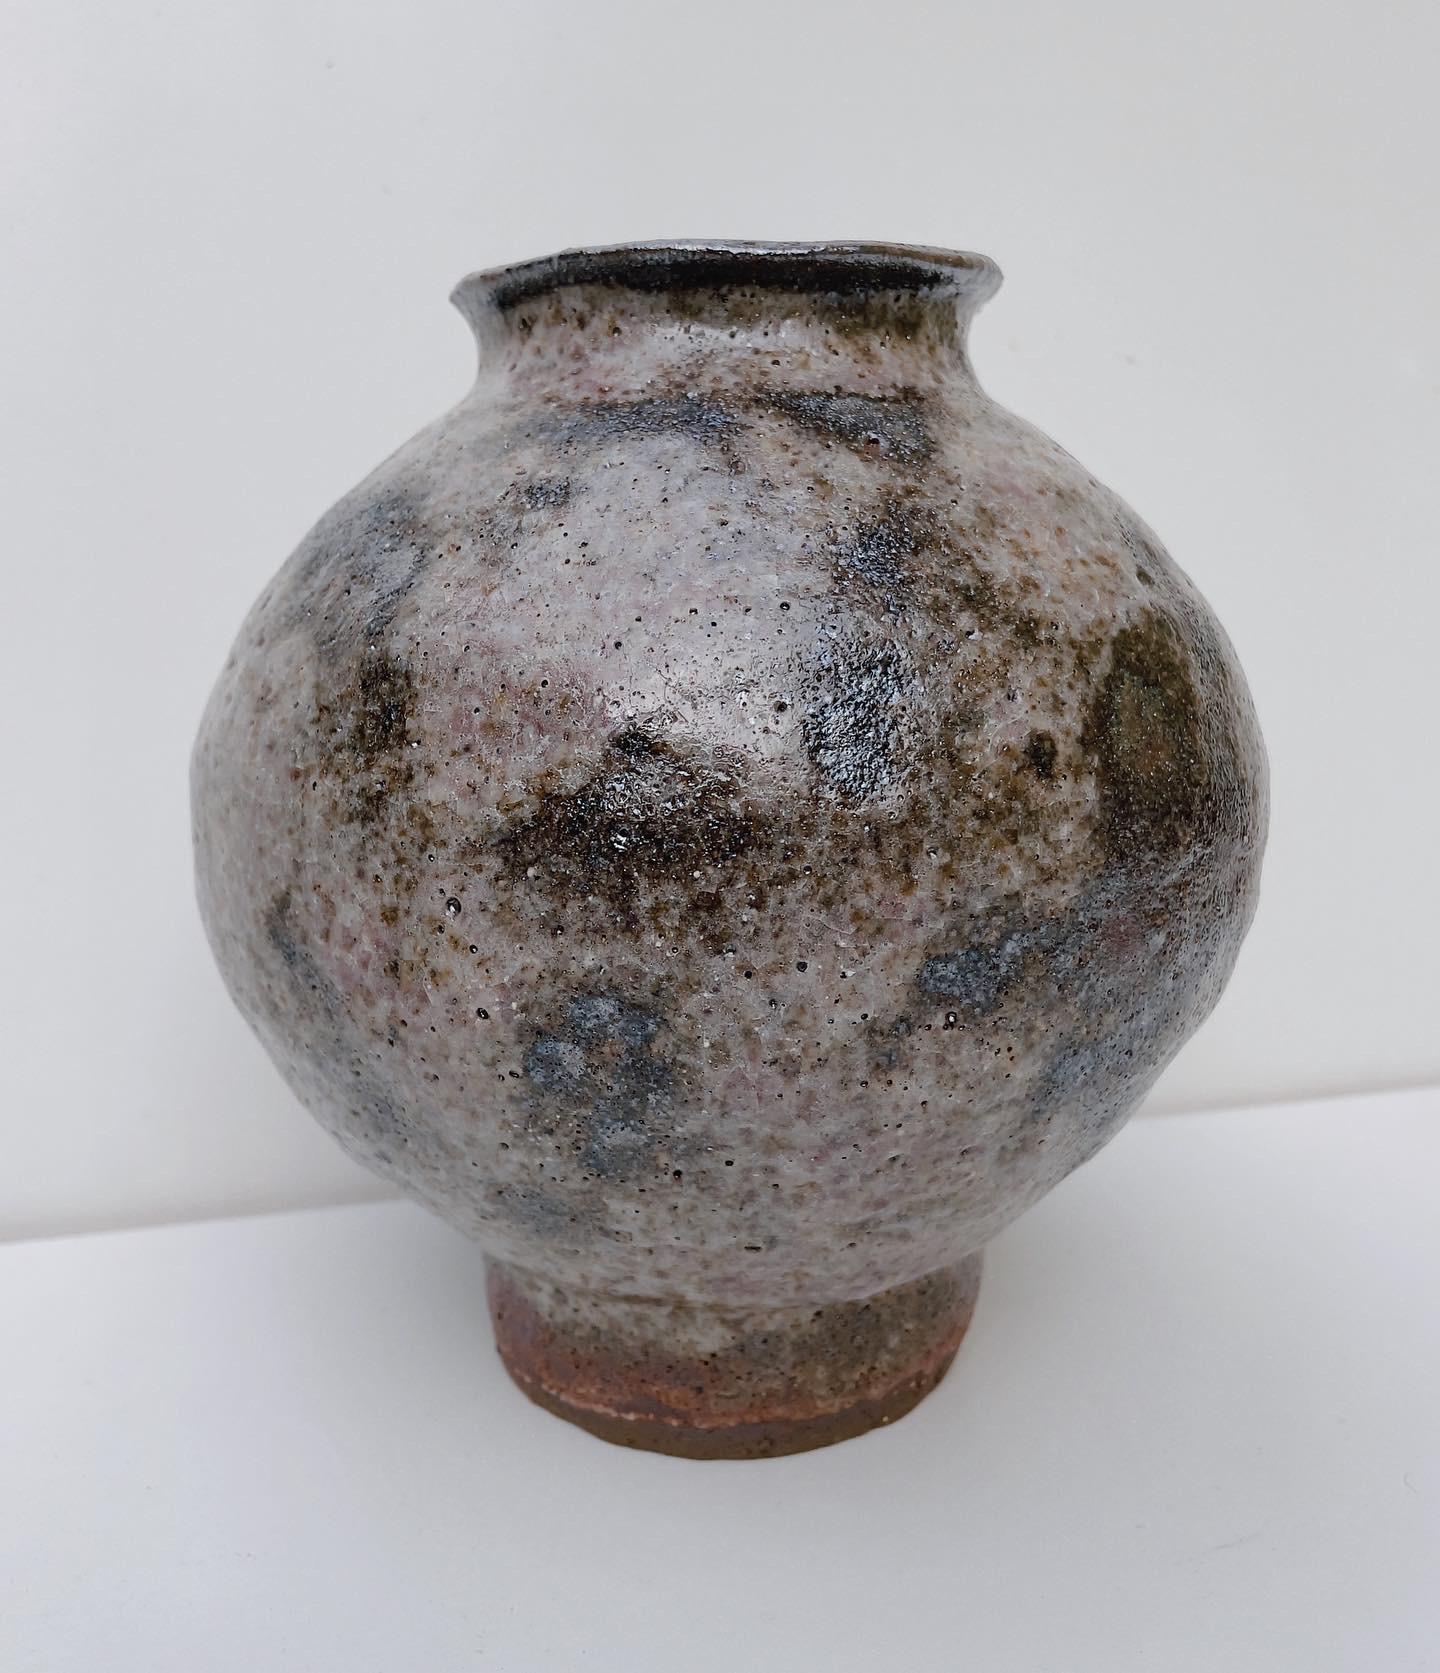 Small brown rituals vase by Lisa Geue
Dimensions: D 17 x W 16 x H 16 cm
Materials: Terracotta, Shino glazes, multiple firings
Non-functional.

By researching ancient and indigenous rites, practices, and rituals, Geue observes the meaning of the